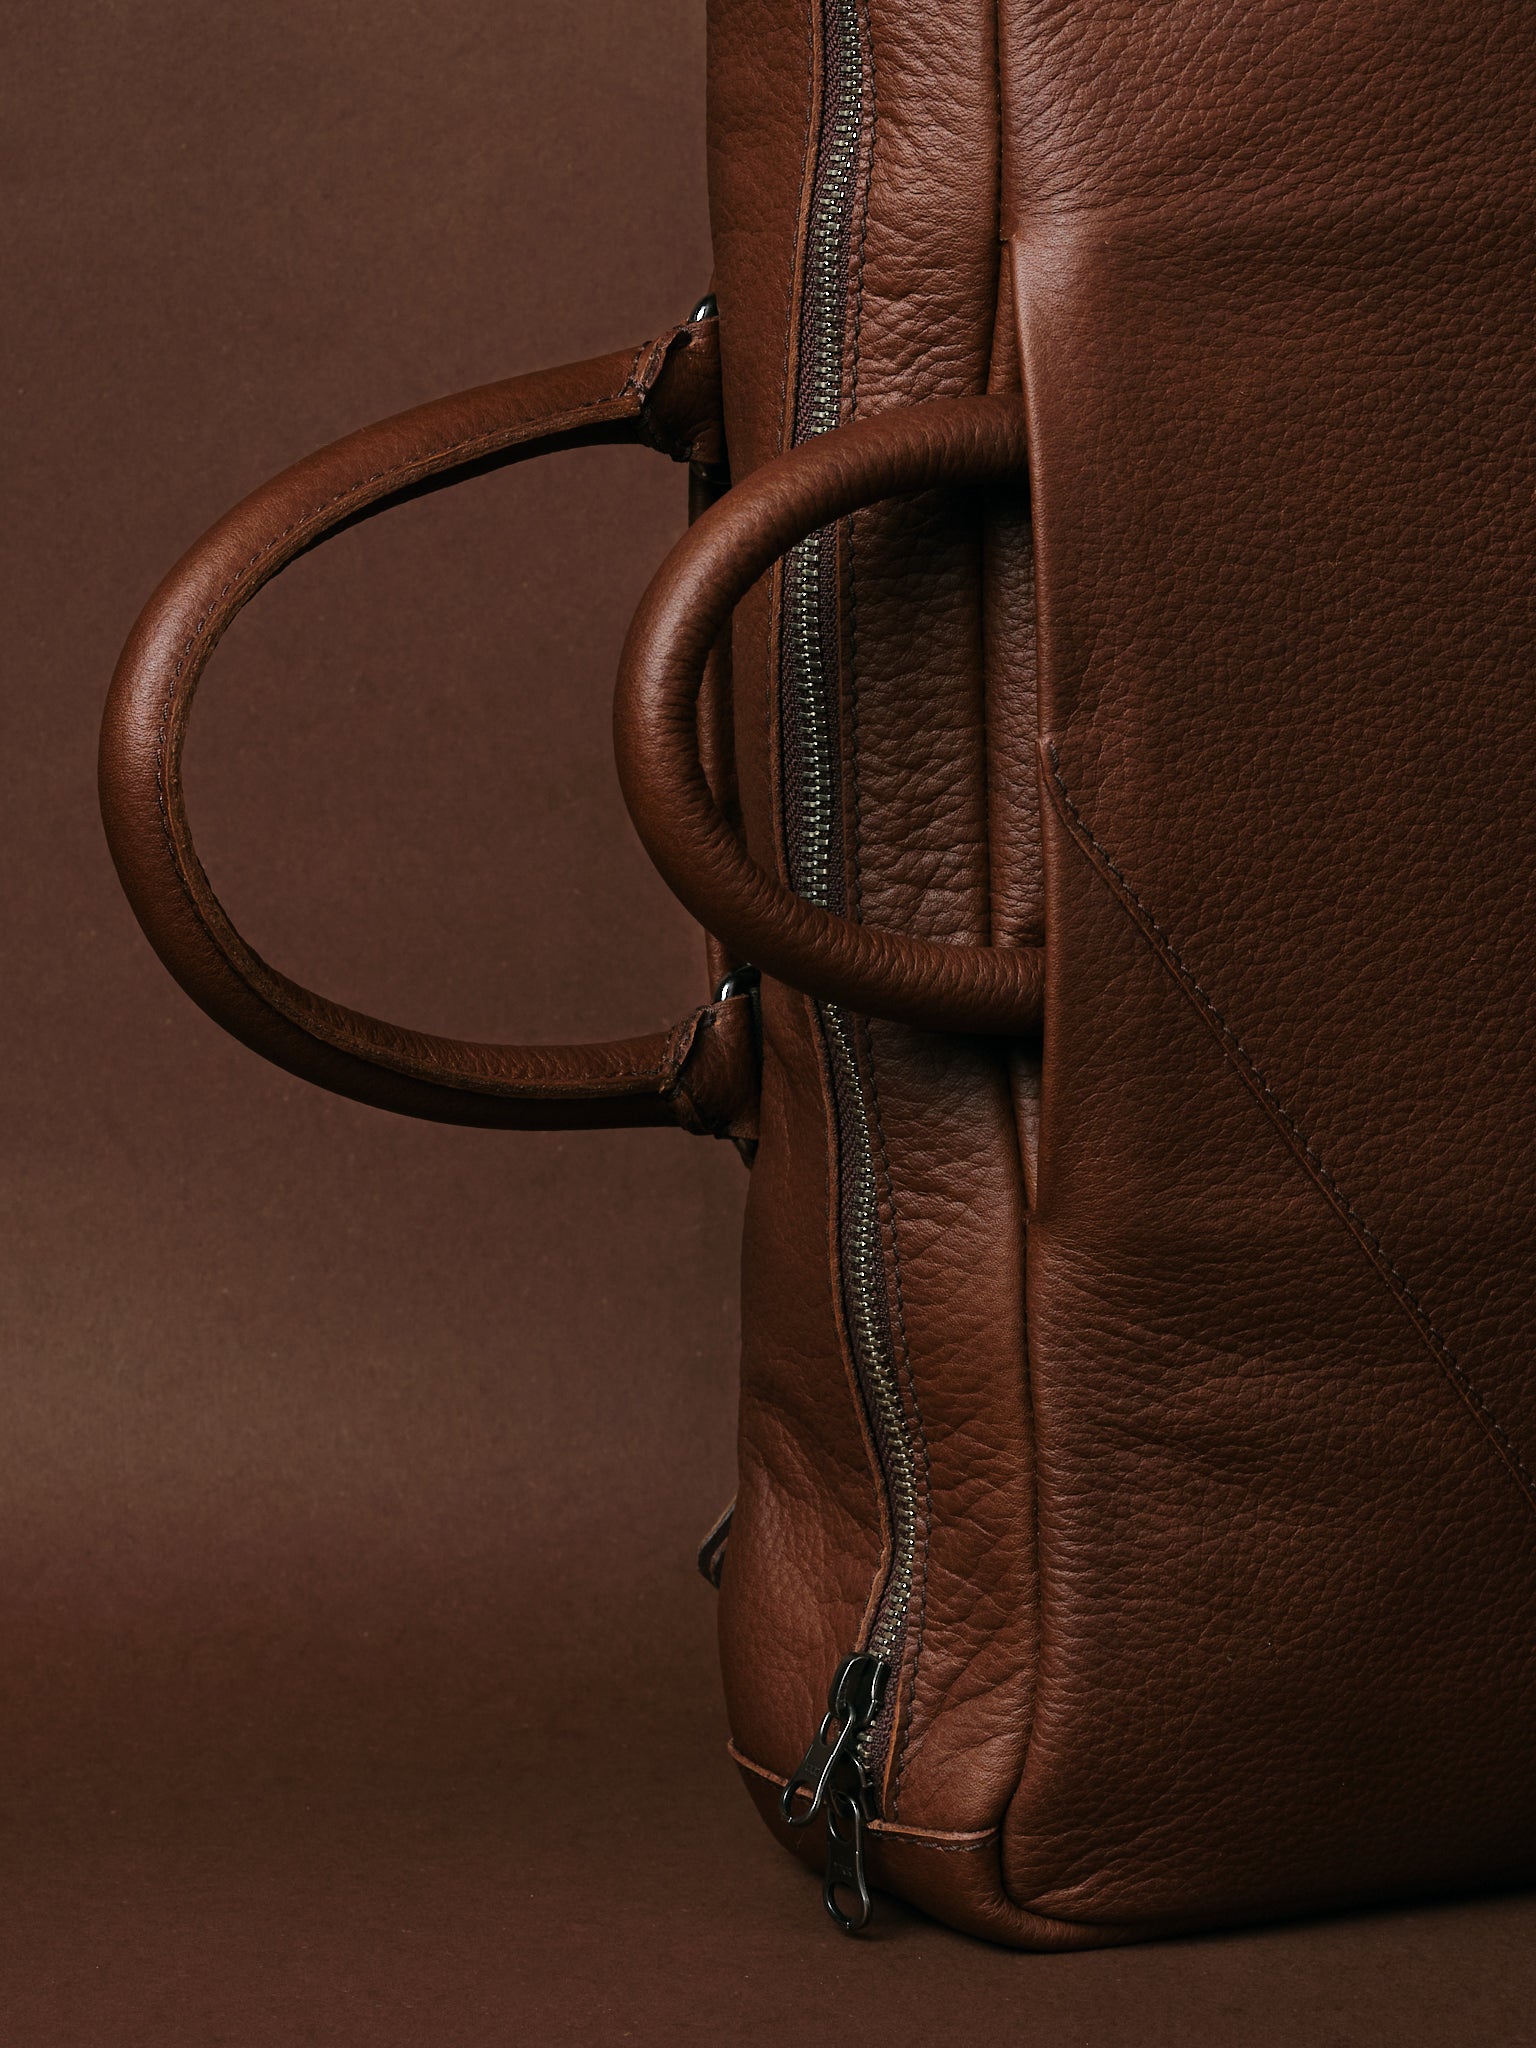 Retractable Handles for Business Briefcase Mode. Brown Leather Briefcases by Capra